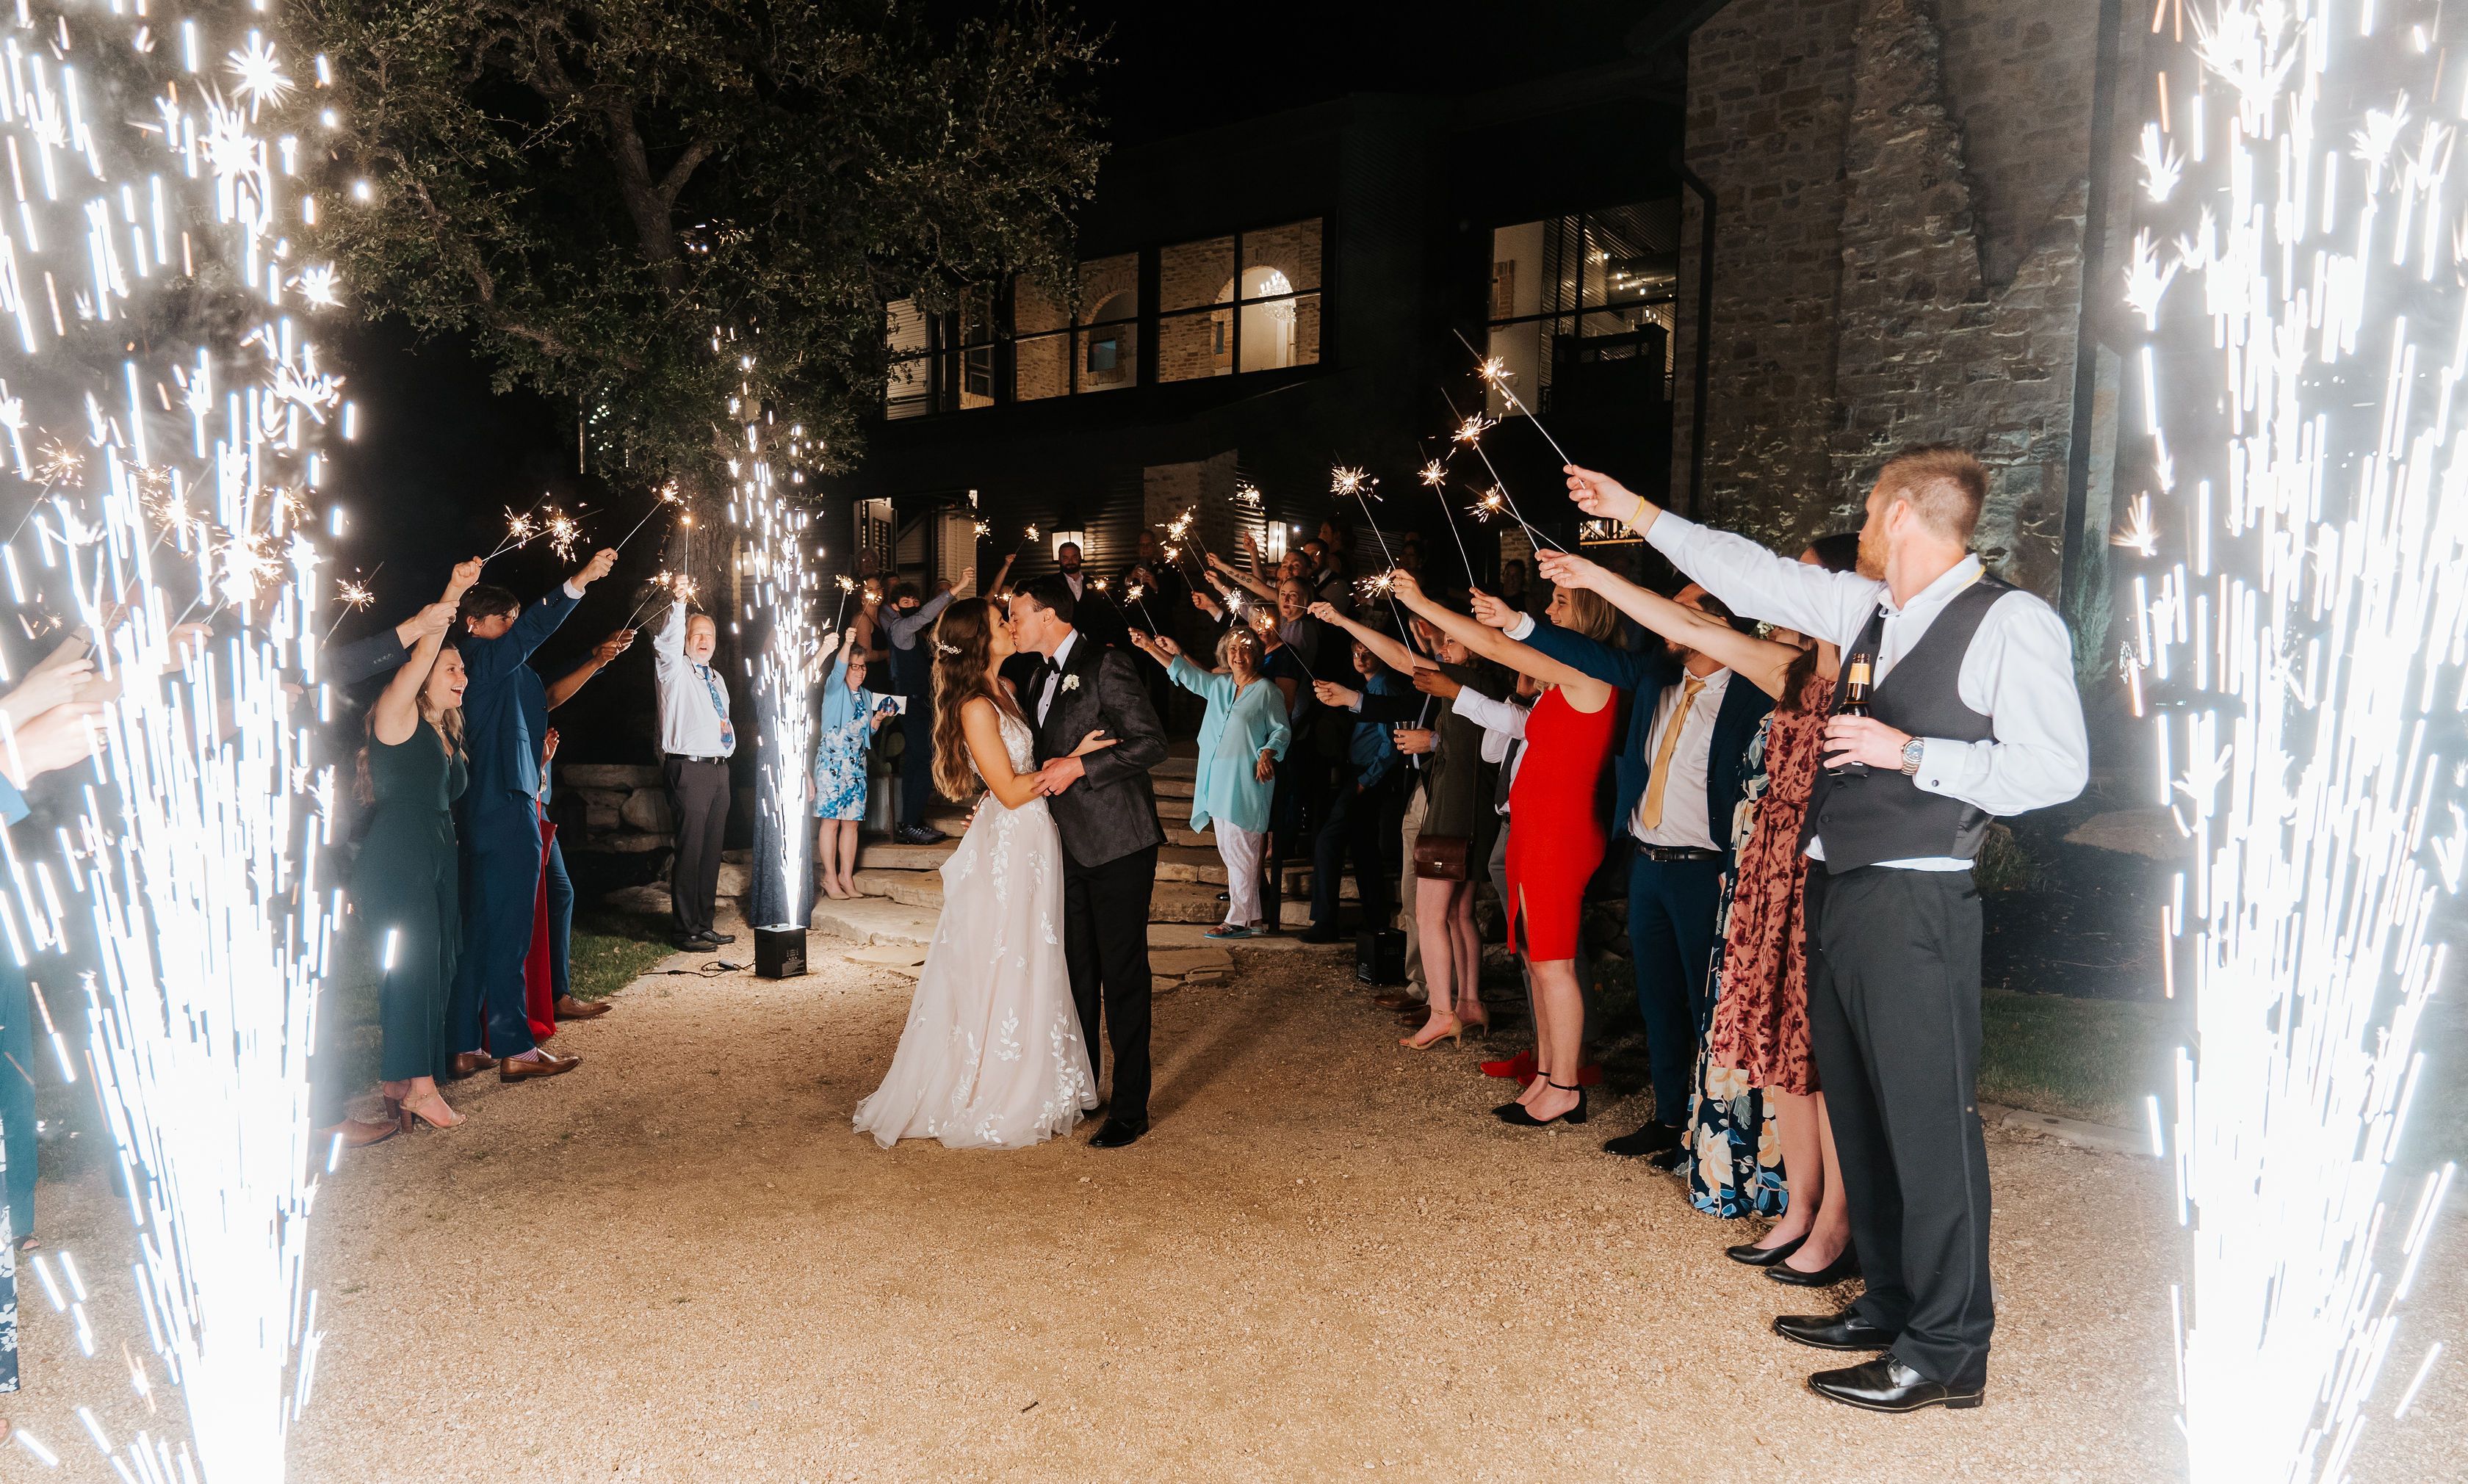 The newlyweds kiss surrounded by sparklers held by their guests, and showering up from the ground.